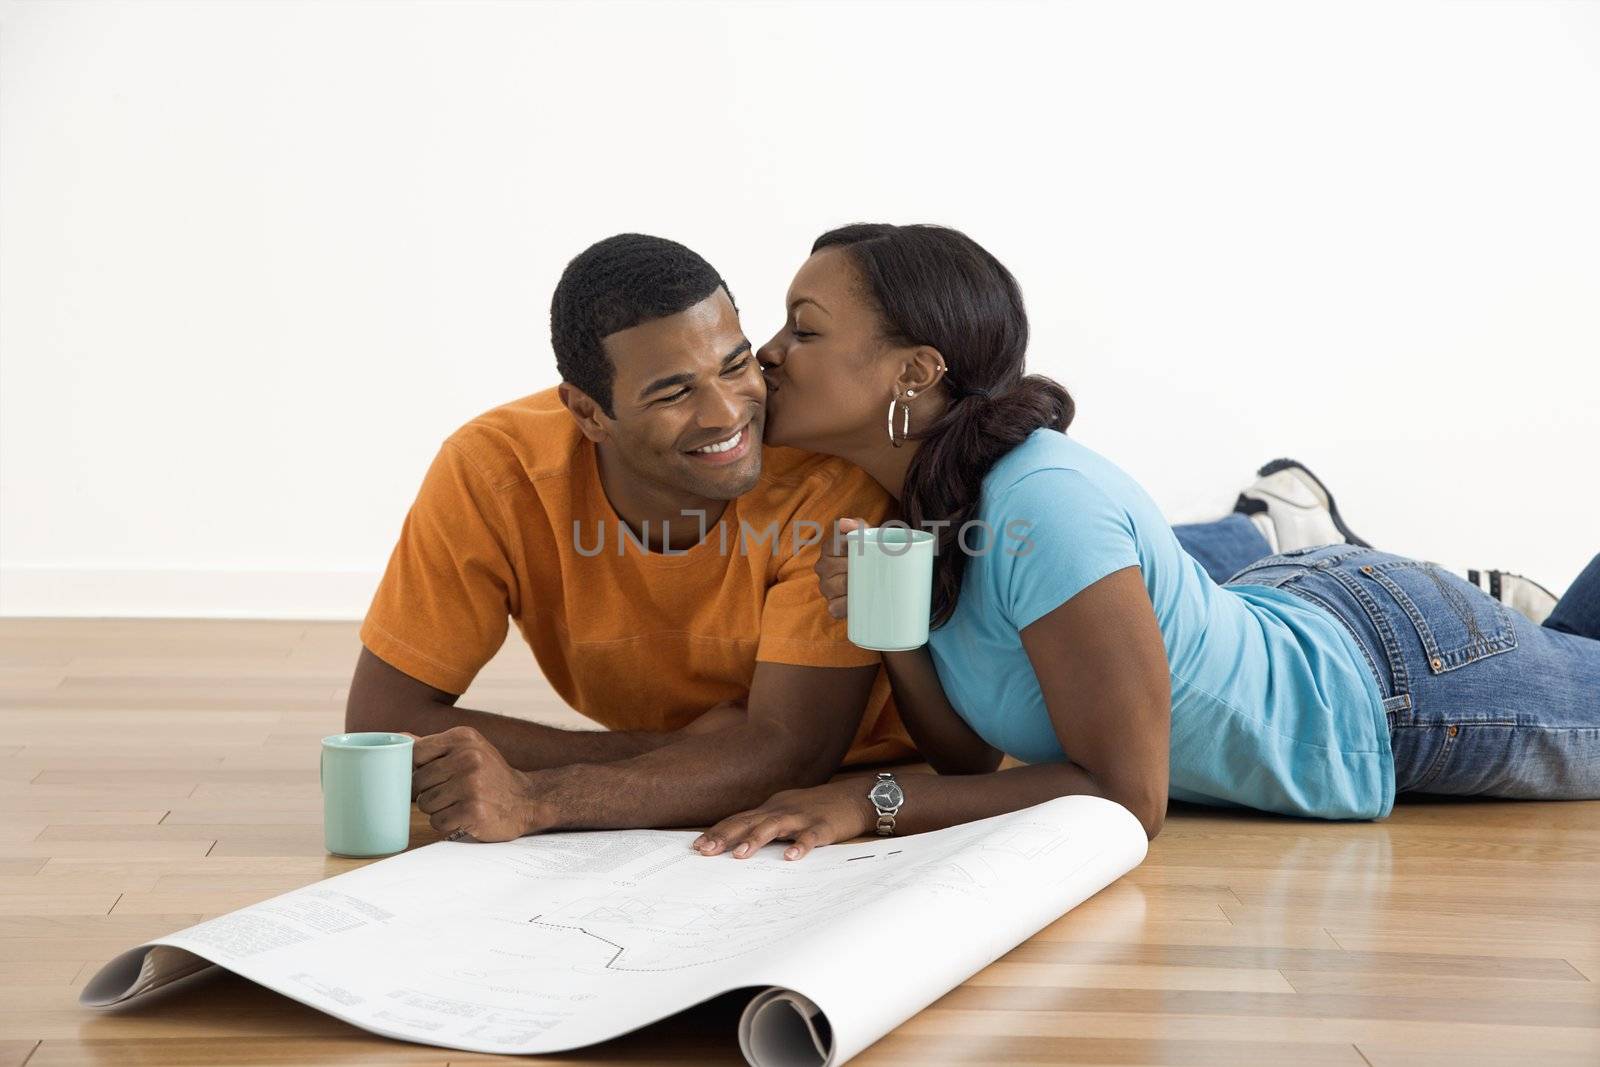 African American female kissing man next to blueprints.